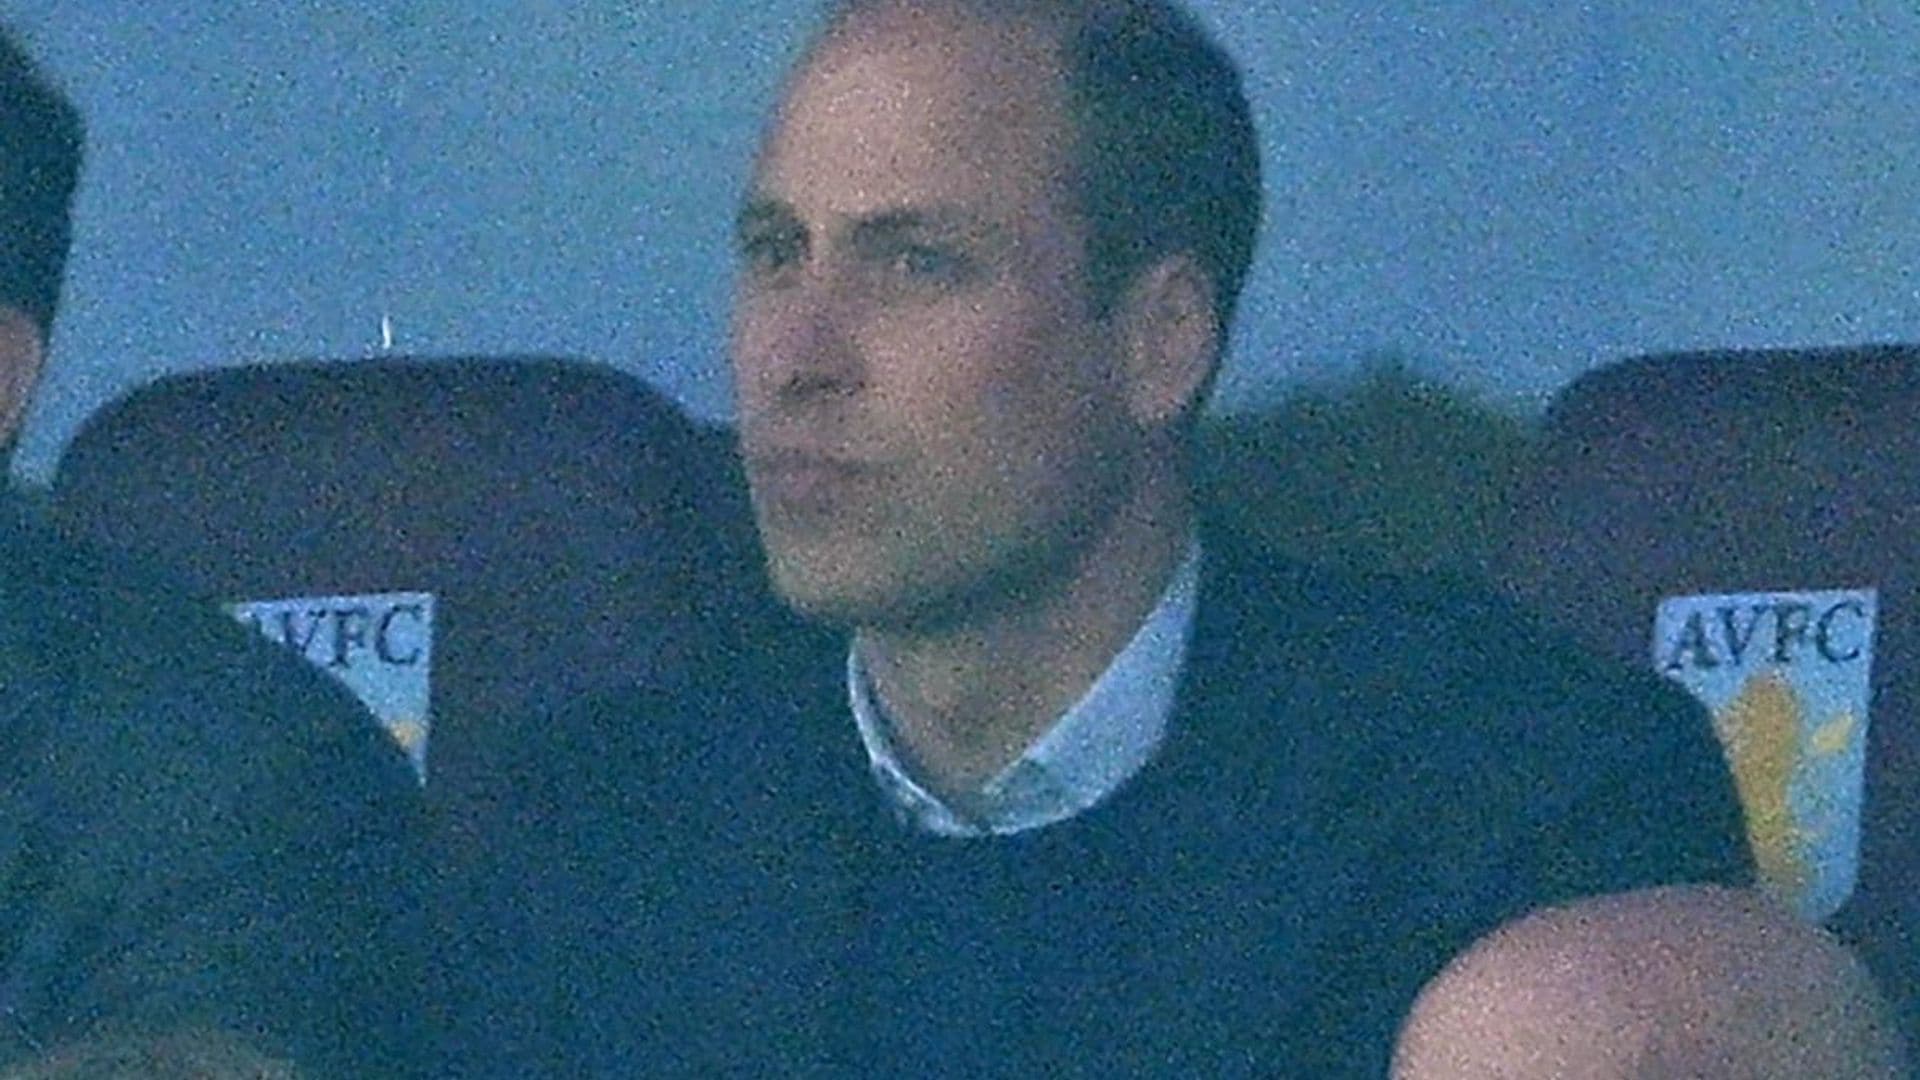 Prince William steps out on daughter Princess Charlotte’s birthday